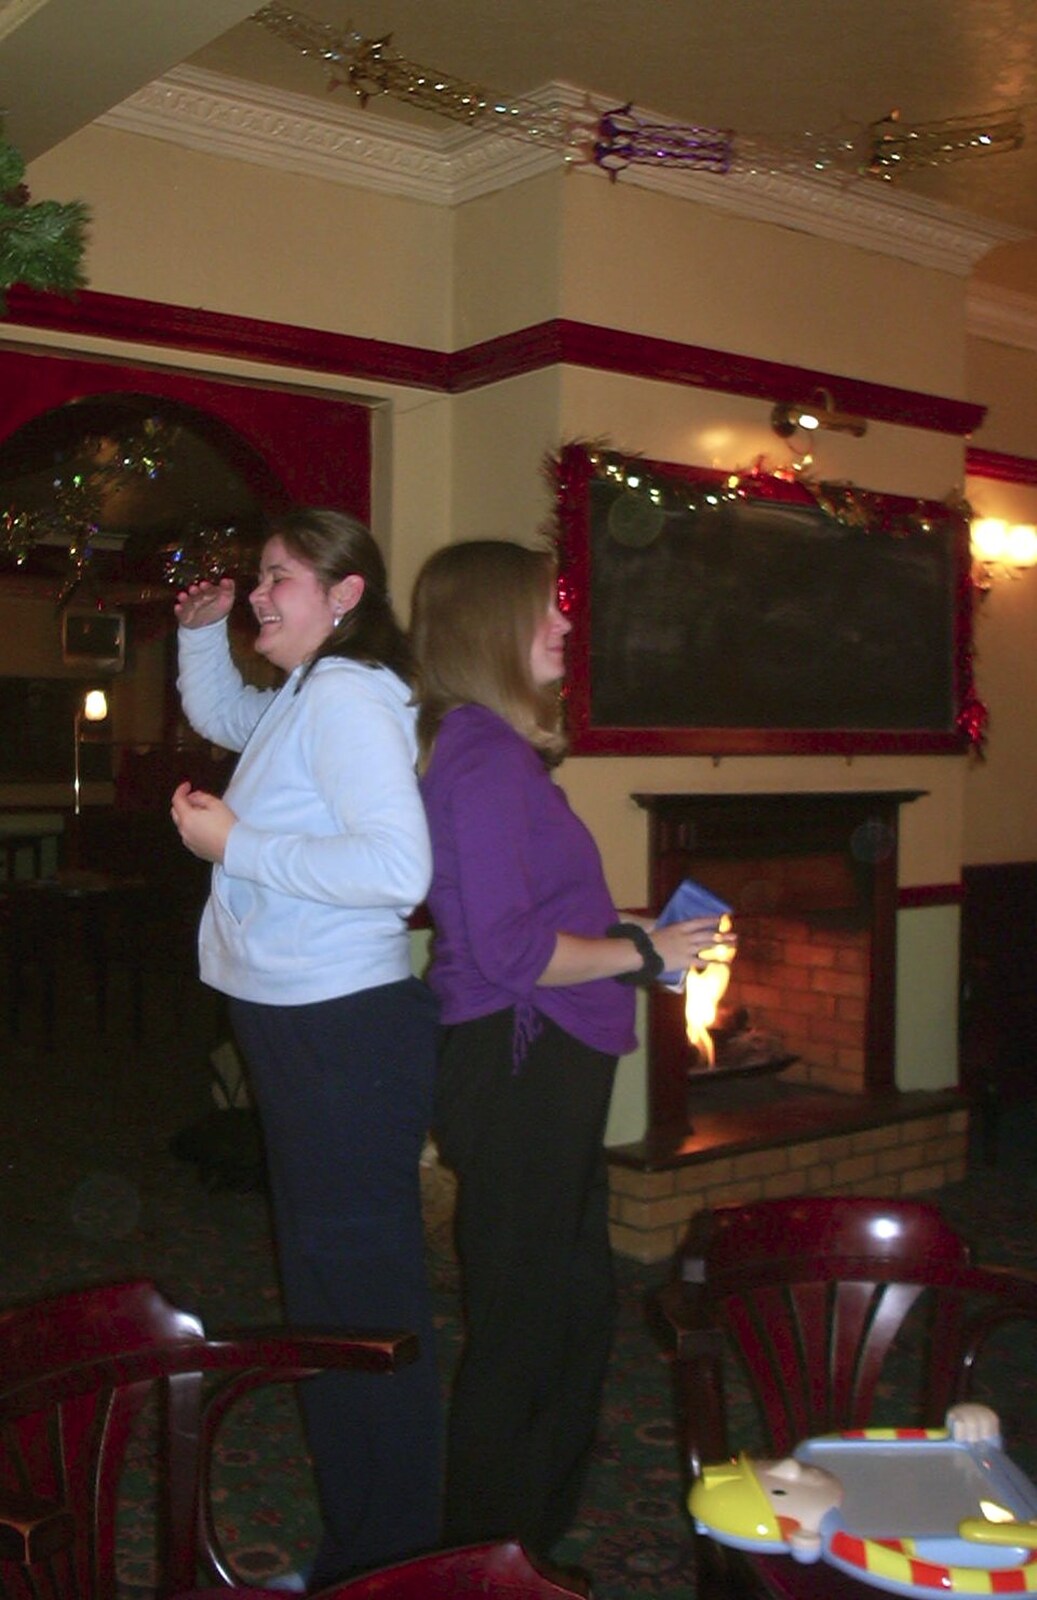 A 'who's the tallest' contest breaks out from Christmas at The Cottage, Thorpe St. Andrew, Norwich - 25th December 2003